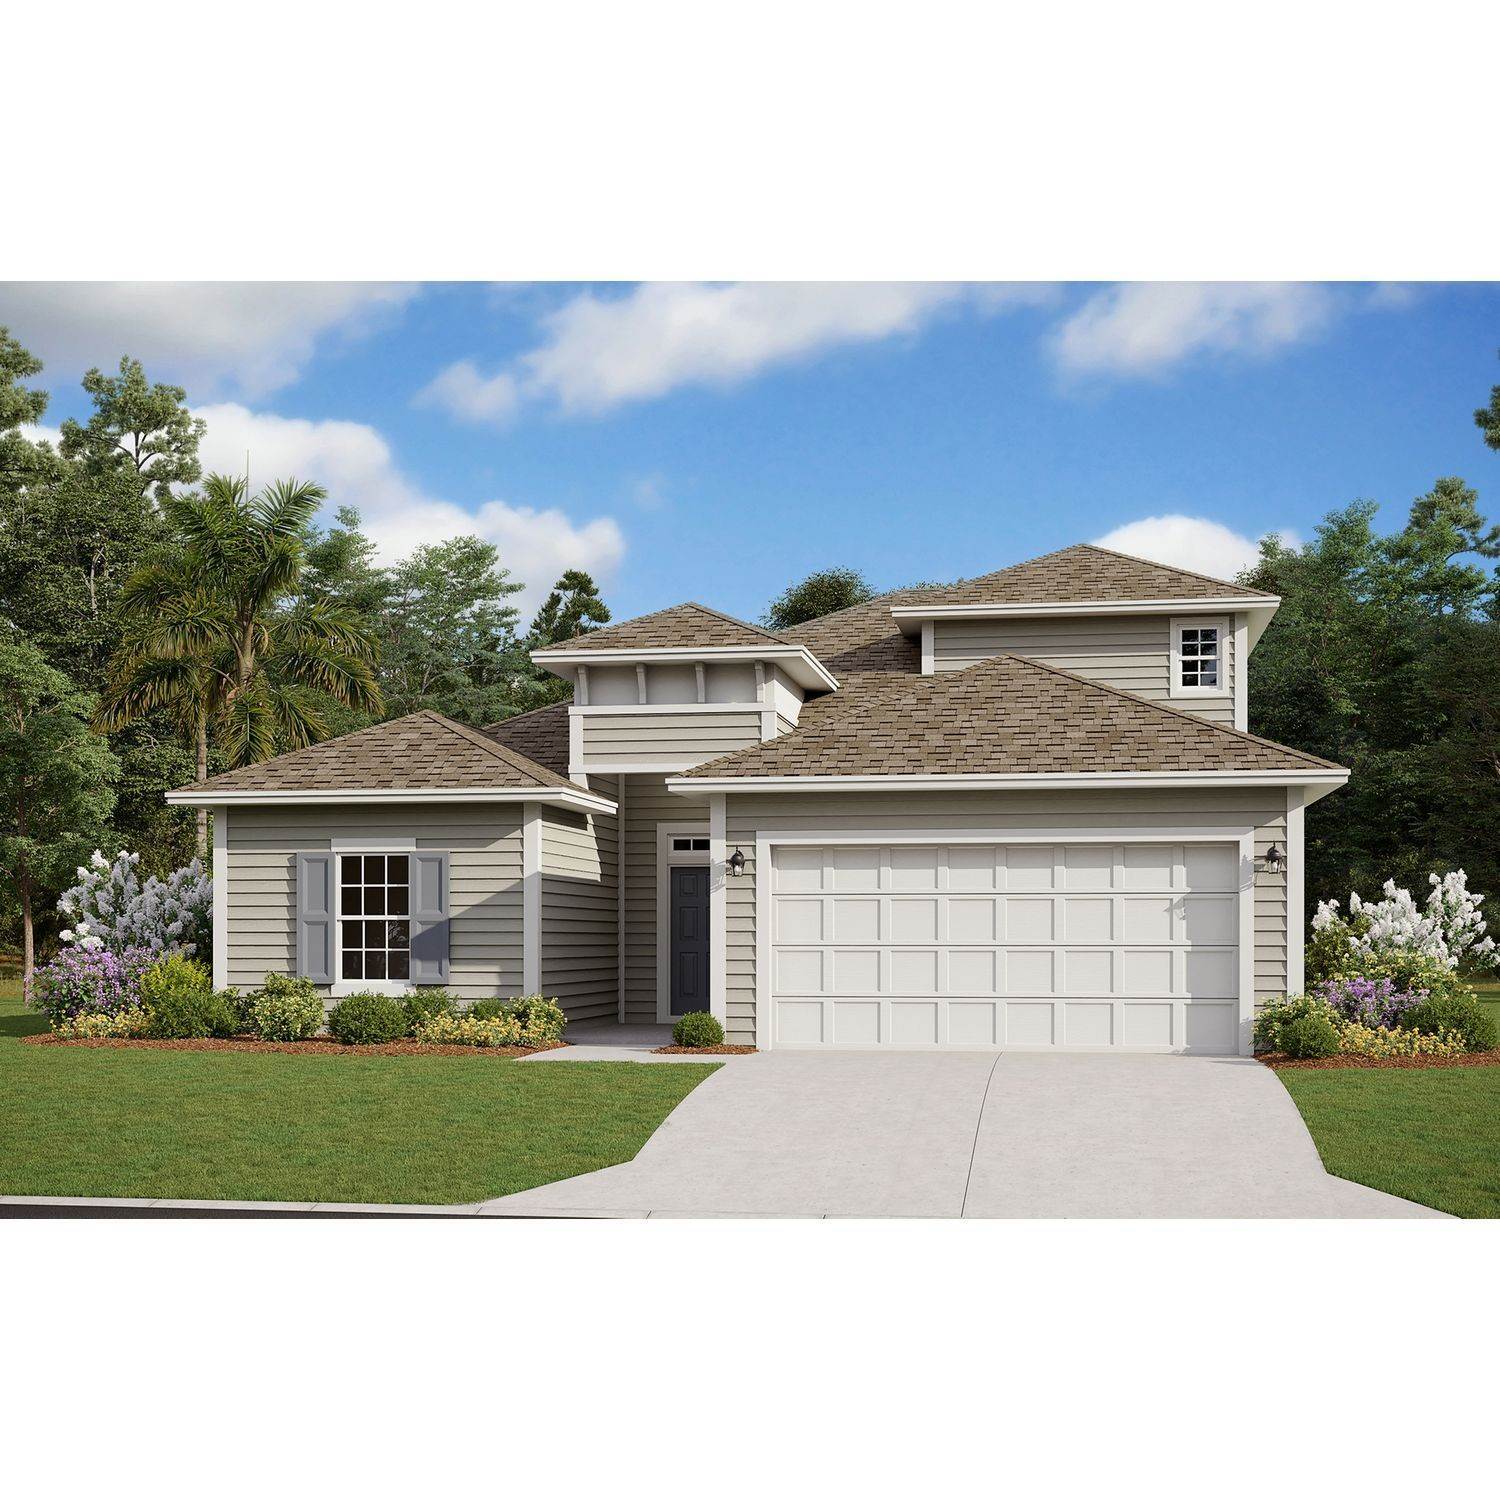 Single Family for Sale at St. Augustine, FL 32092